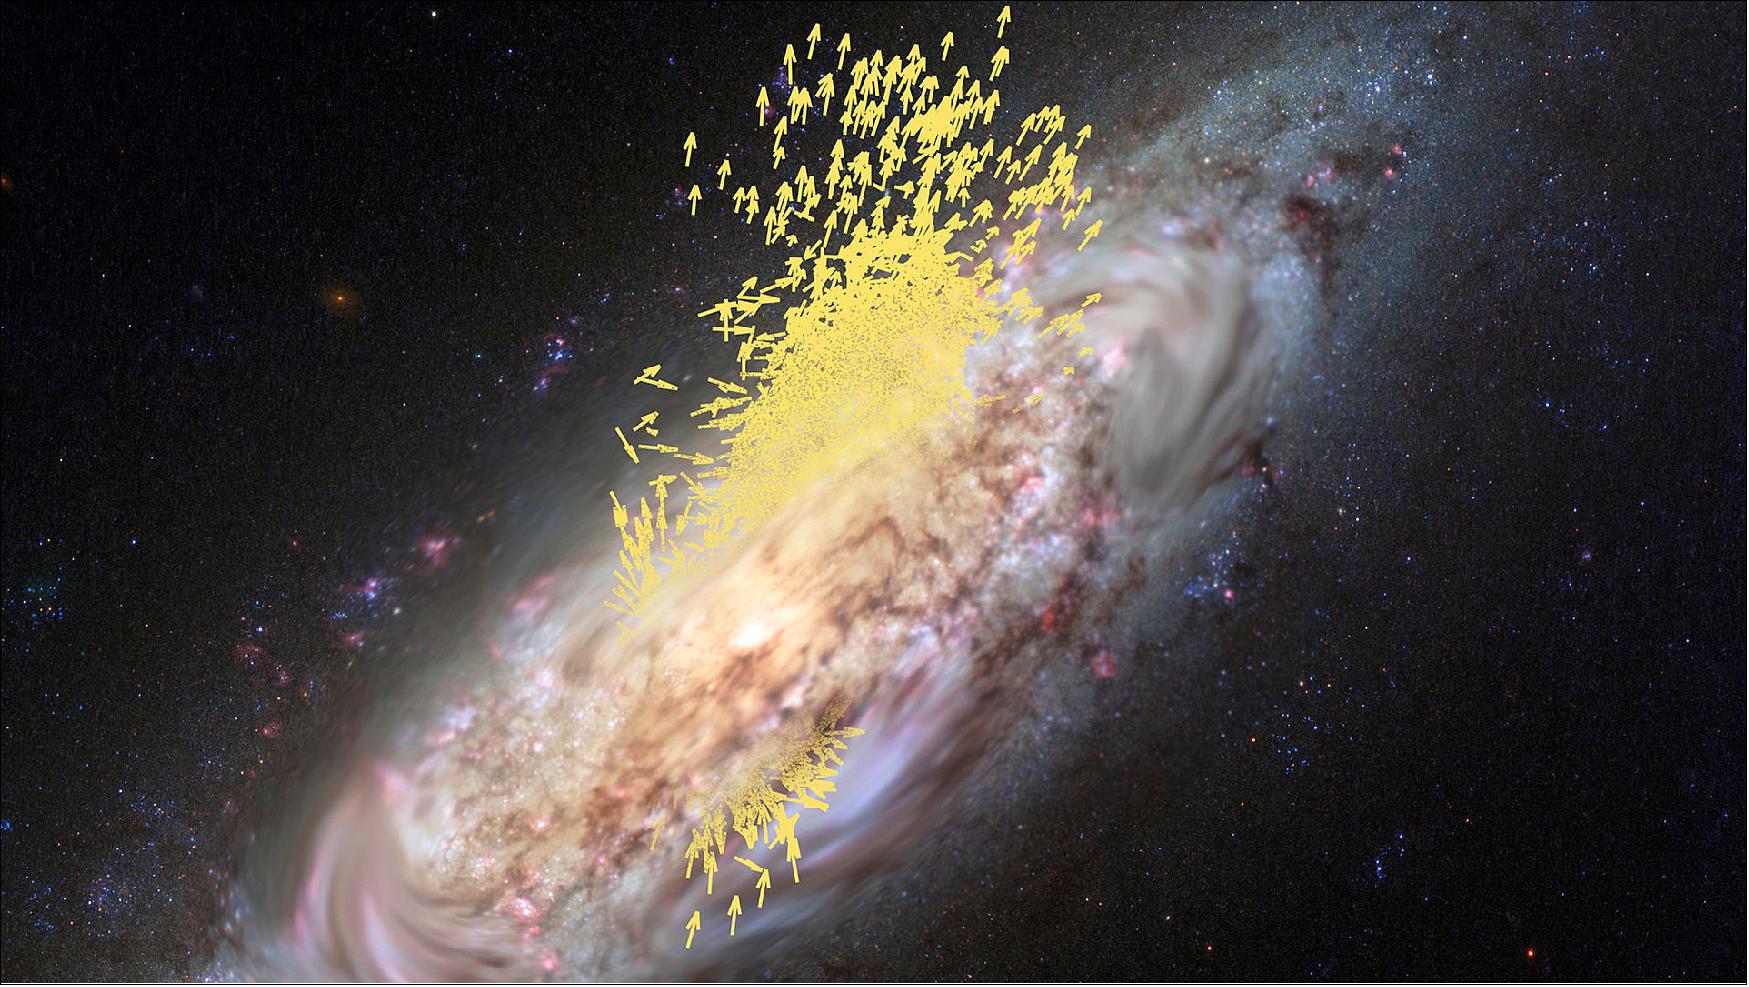 Figure 31: Artist's impression of the merger between the Gaia-Enceladus galaxy and our Milky Way, which took place during our Galaxy's early formation stages, 10 billion years ago (image credit: ESA (artist's impression and composition); Koppelman, Villalobos and Helmi (simulation); NASA/ESA/Hubble (galaxy image), CC BY-SA 3.0 IGO)